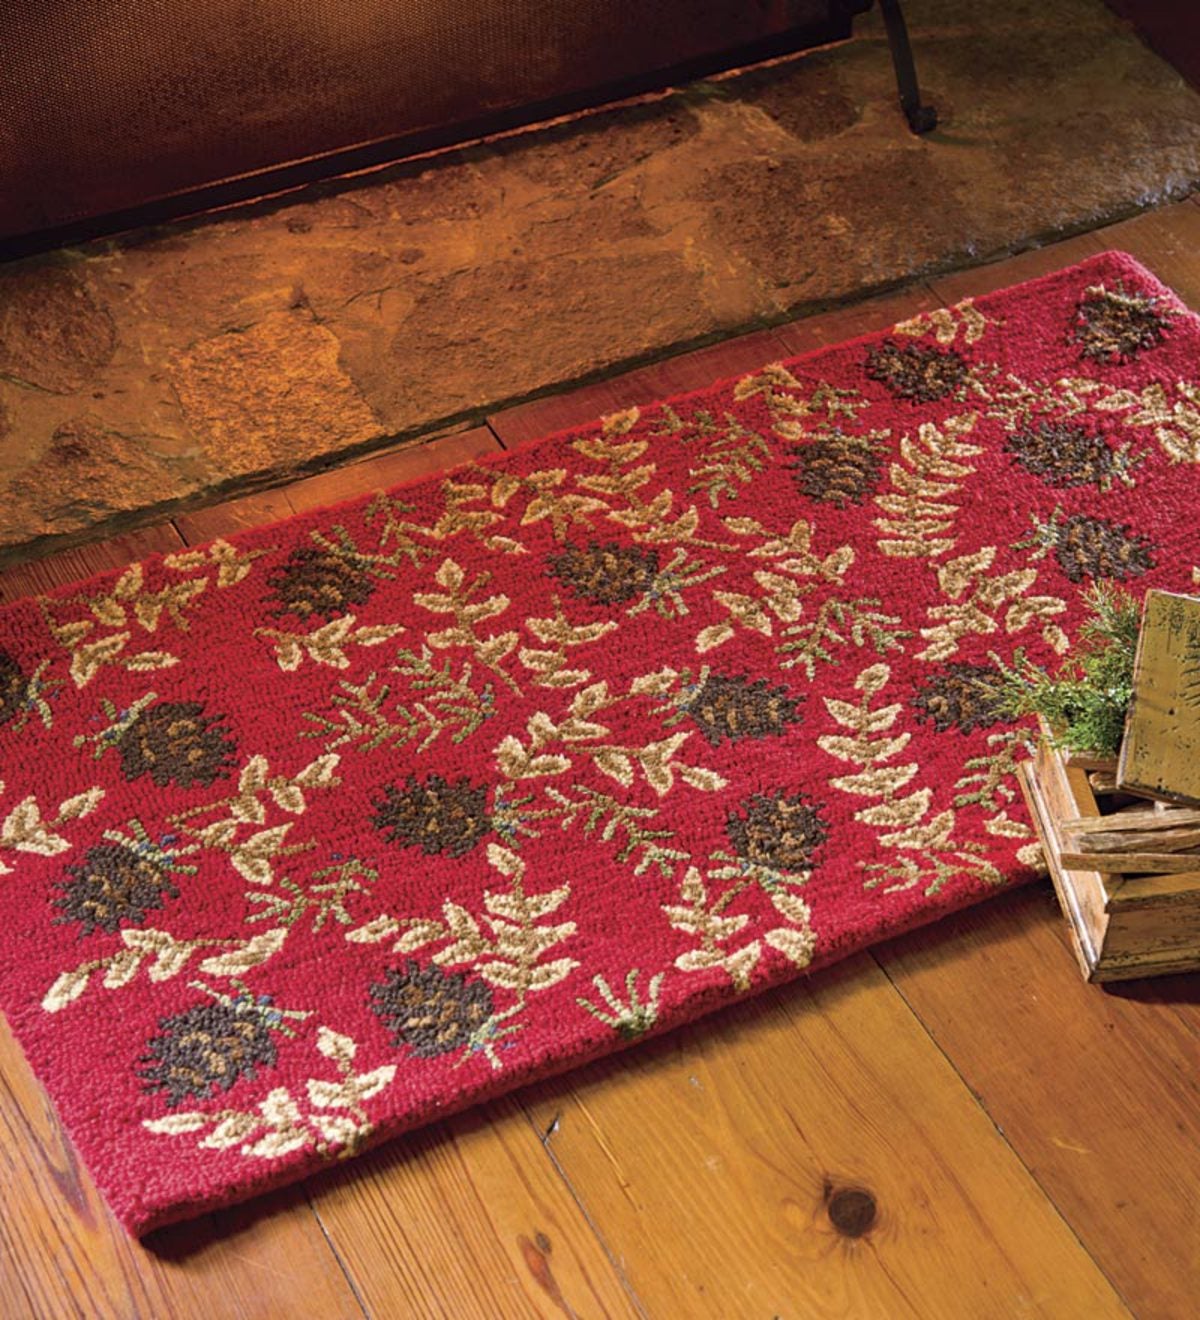 Hand-Hooked Fire-Resistant Ruby Cones Wool Rug